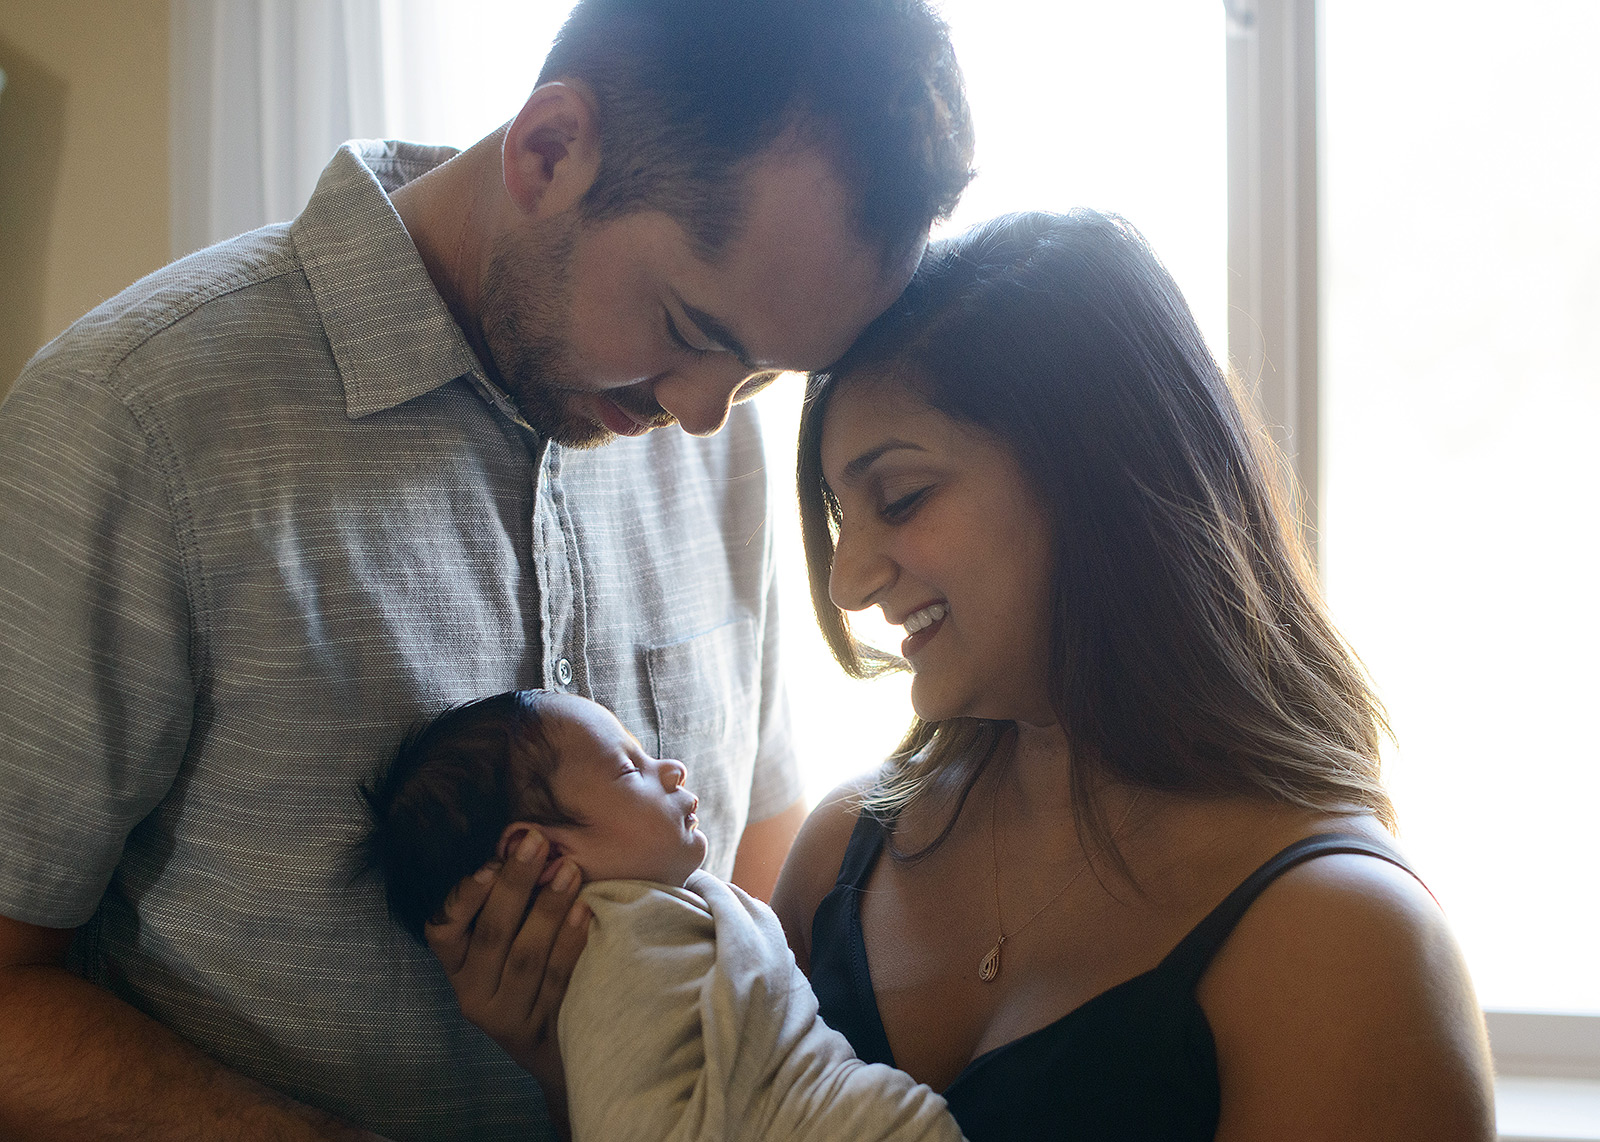 Mom and dad look lovingly at newborn sleepy baby against light in home